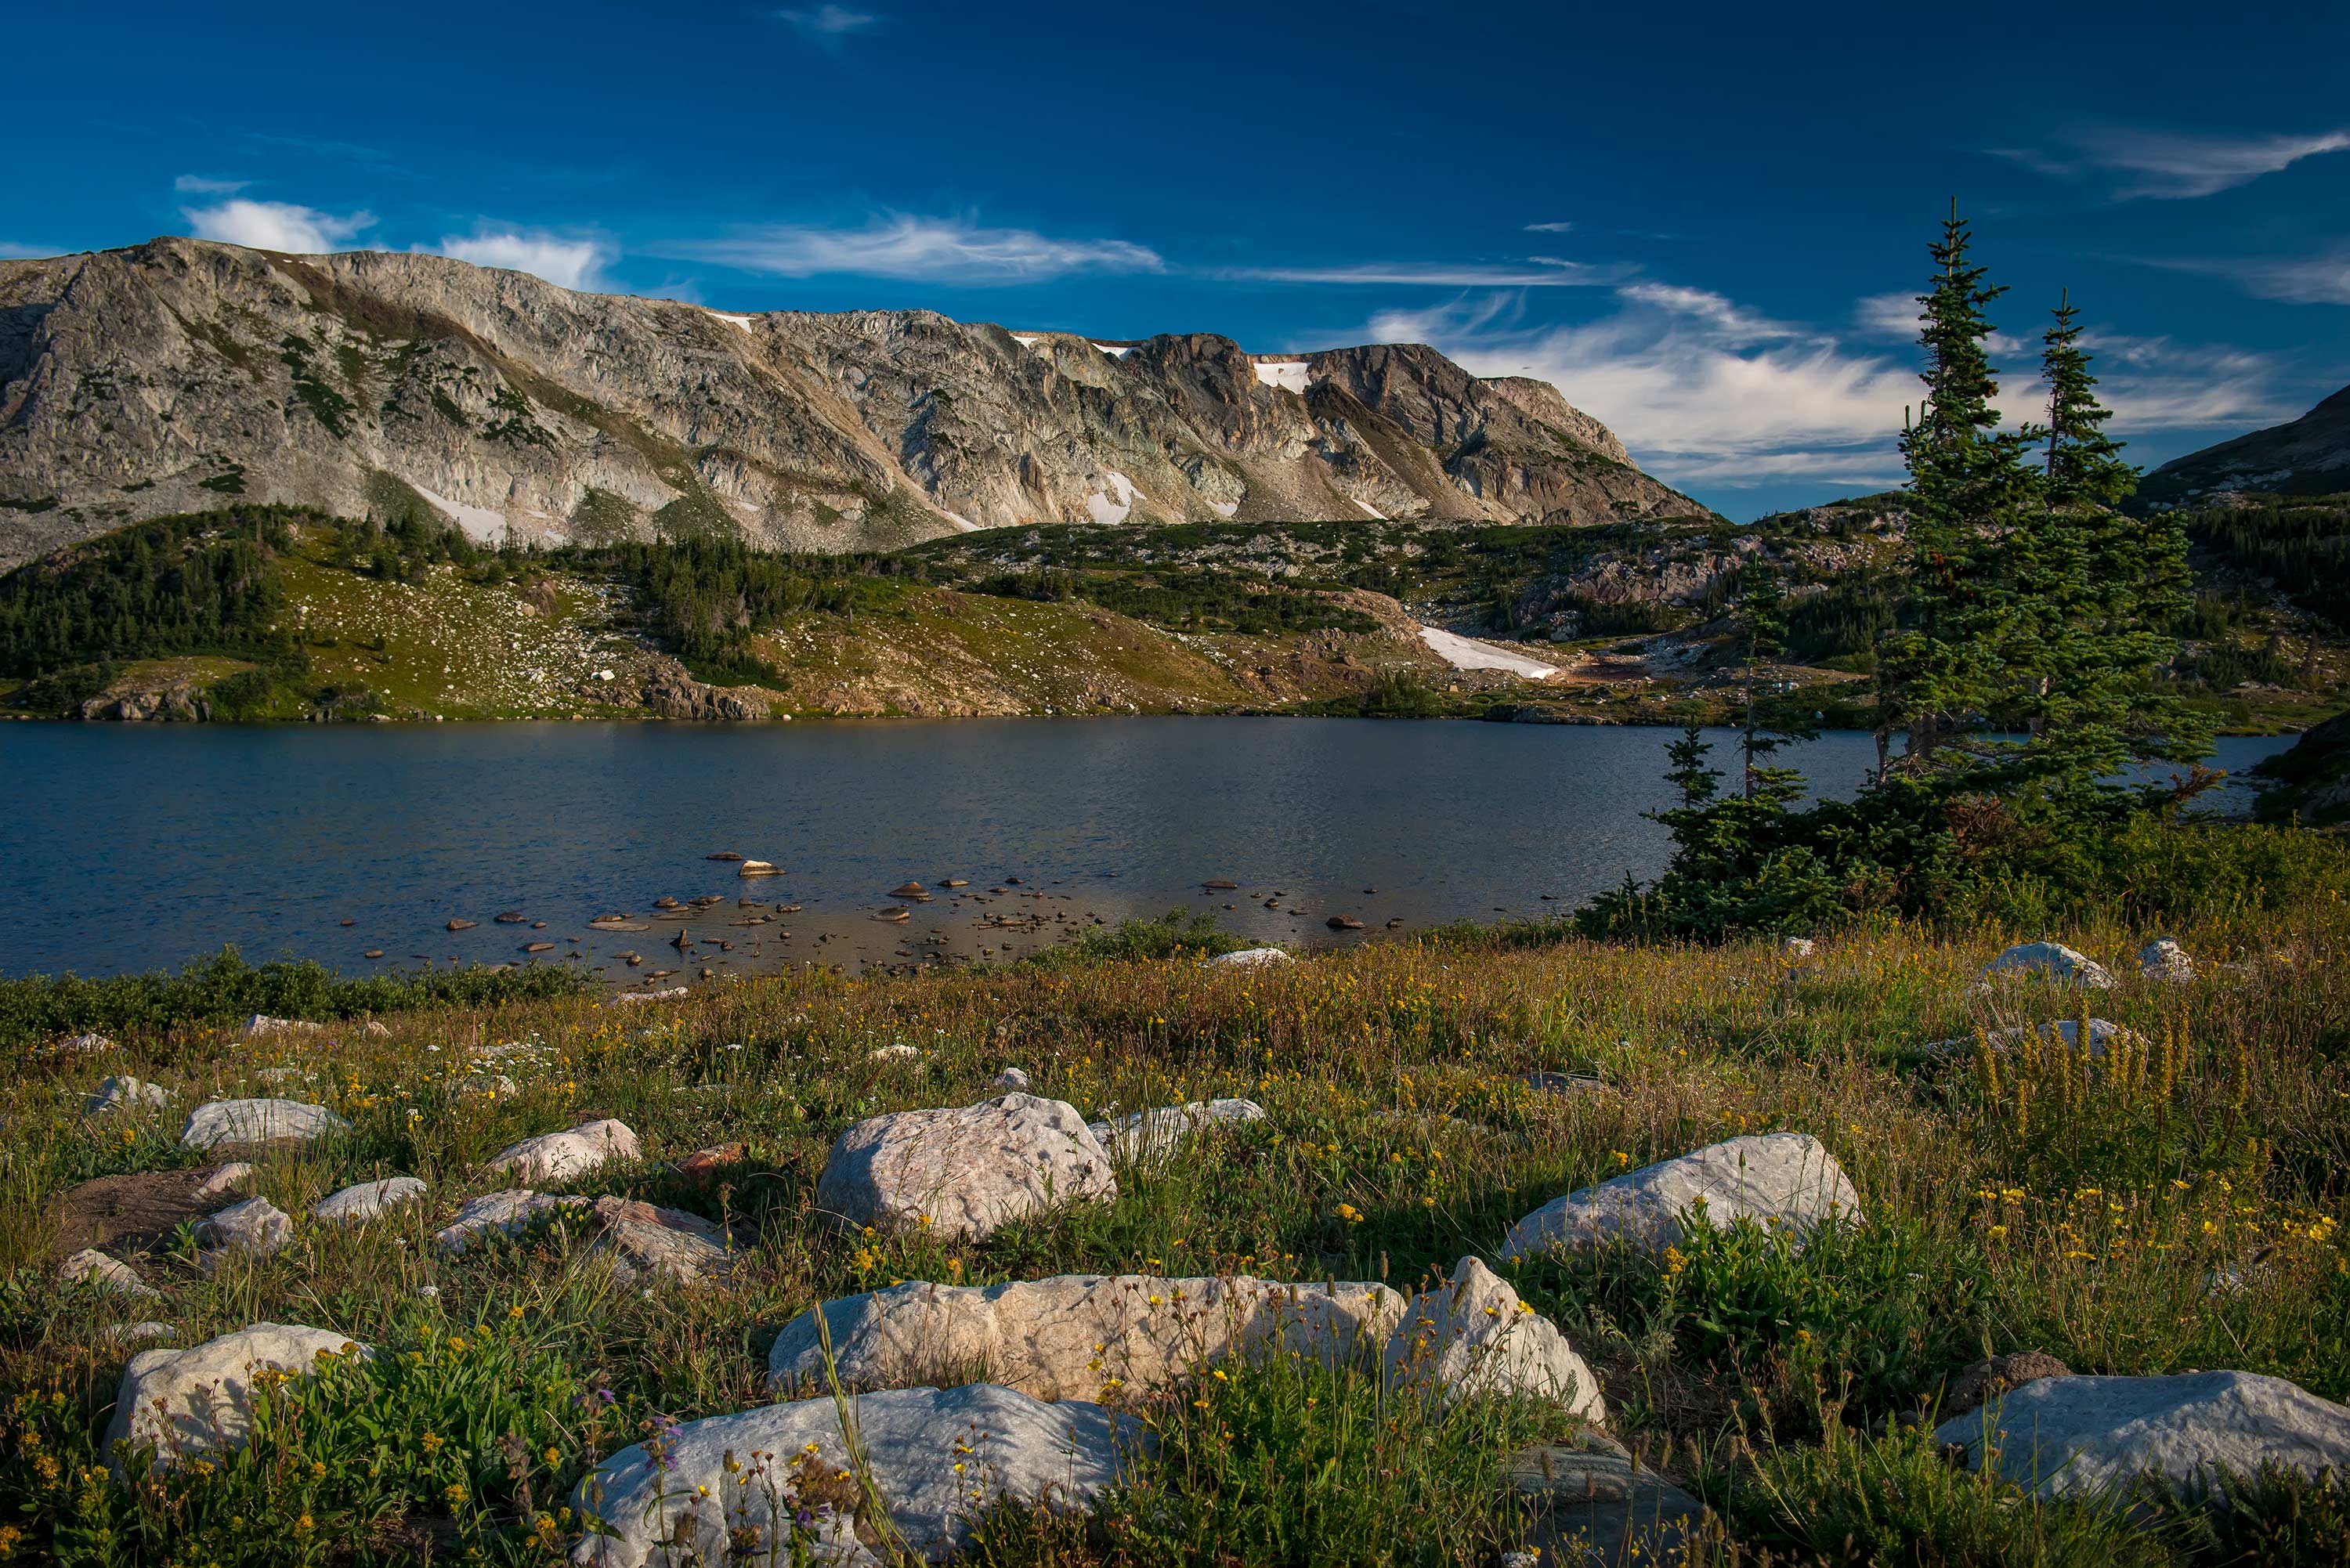 Scenic picture of a lake in the Snowy Range Mountains